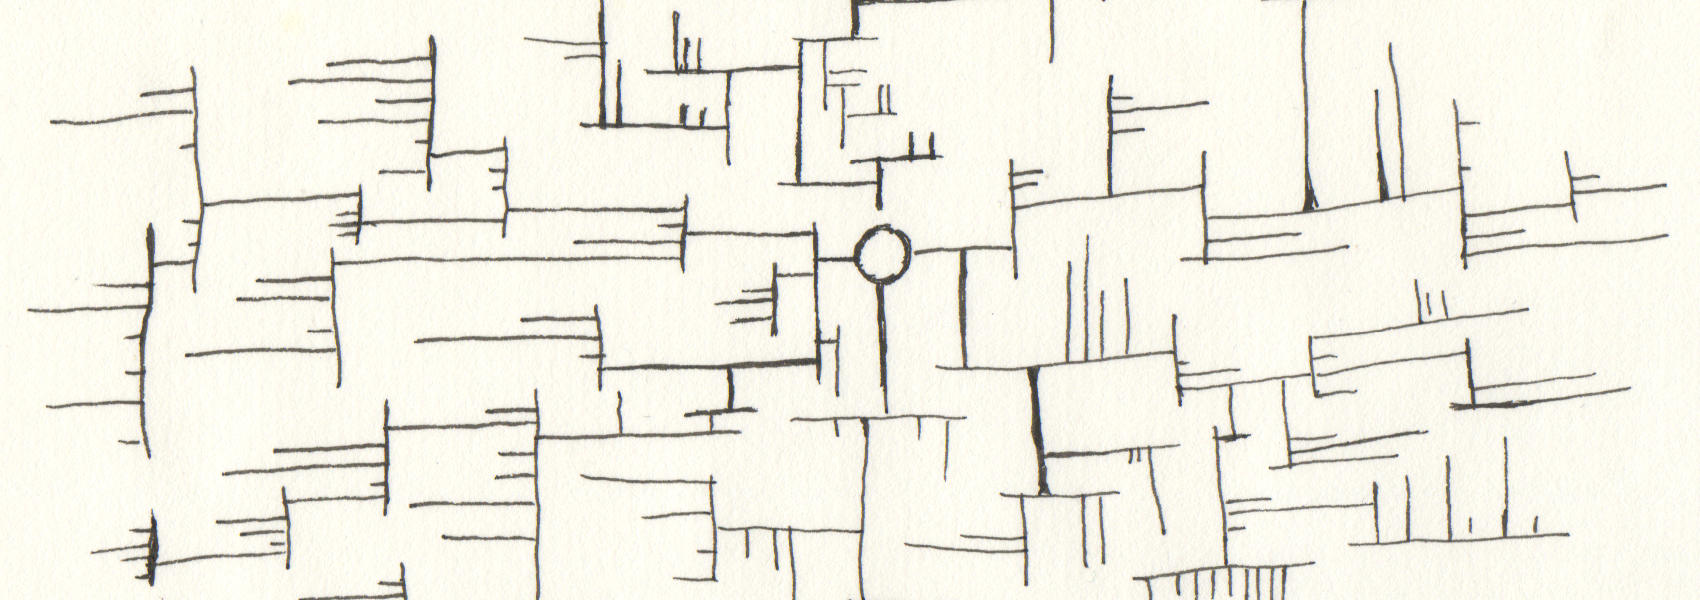 Close crop of Angular Fractal Tree. Ink on paper drawing of an angular tree-like diagram branching out from a central circle. Own work. 2020.